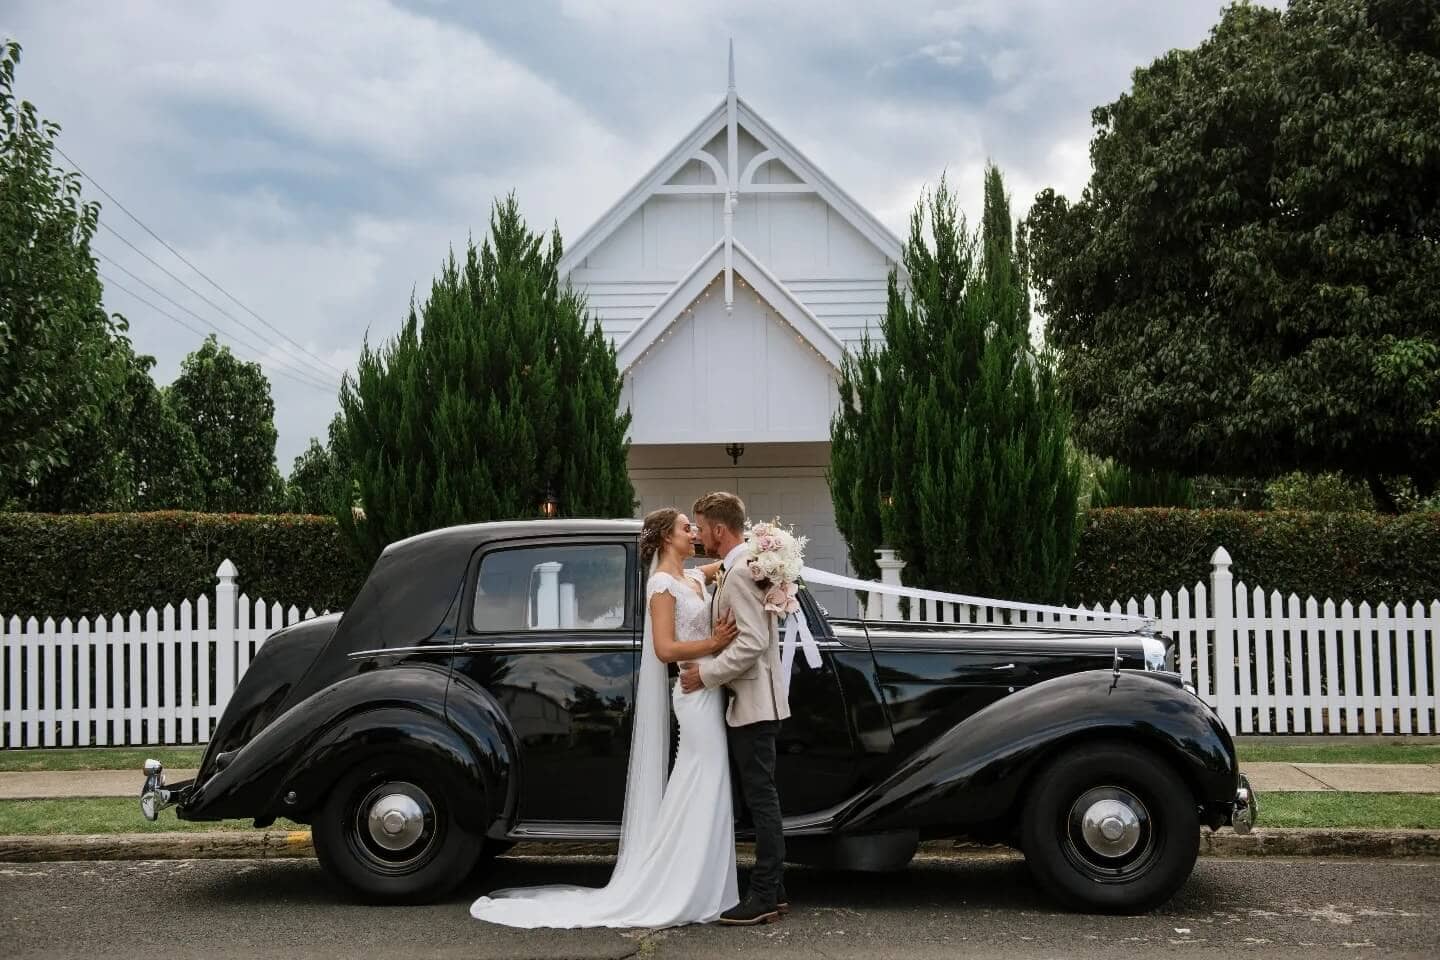 Best-rustic-country-wedding-venues-in-Australia-White-Chapel-Kalbar-Qld-Inc.mill Photography